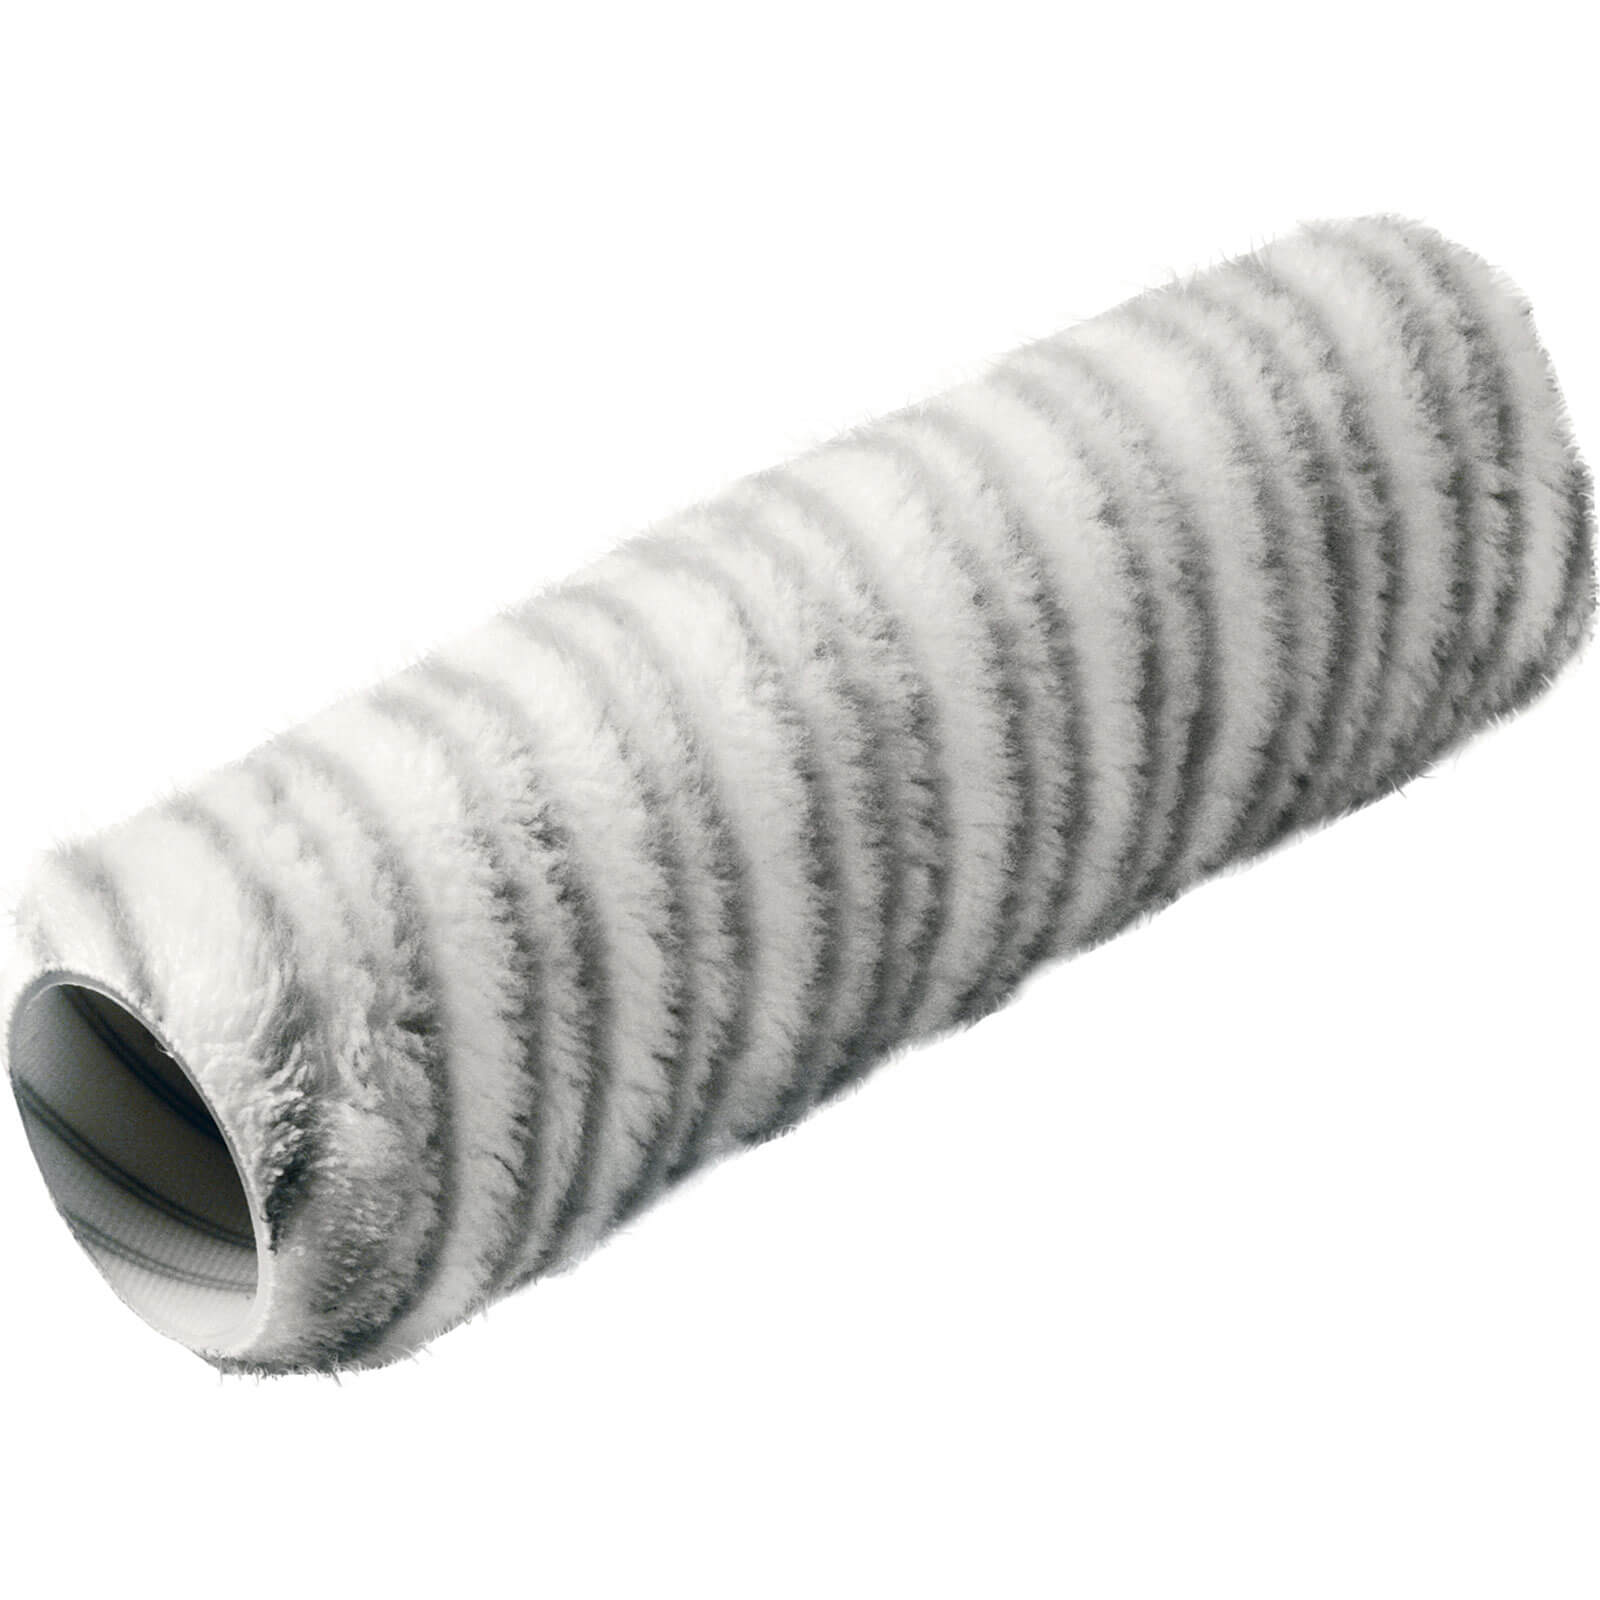 Photos - Putty Knife / Painting Tool Stanley Long Pile Silver Stripe Paint Roller Sleeve 44mm 230mm 